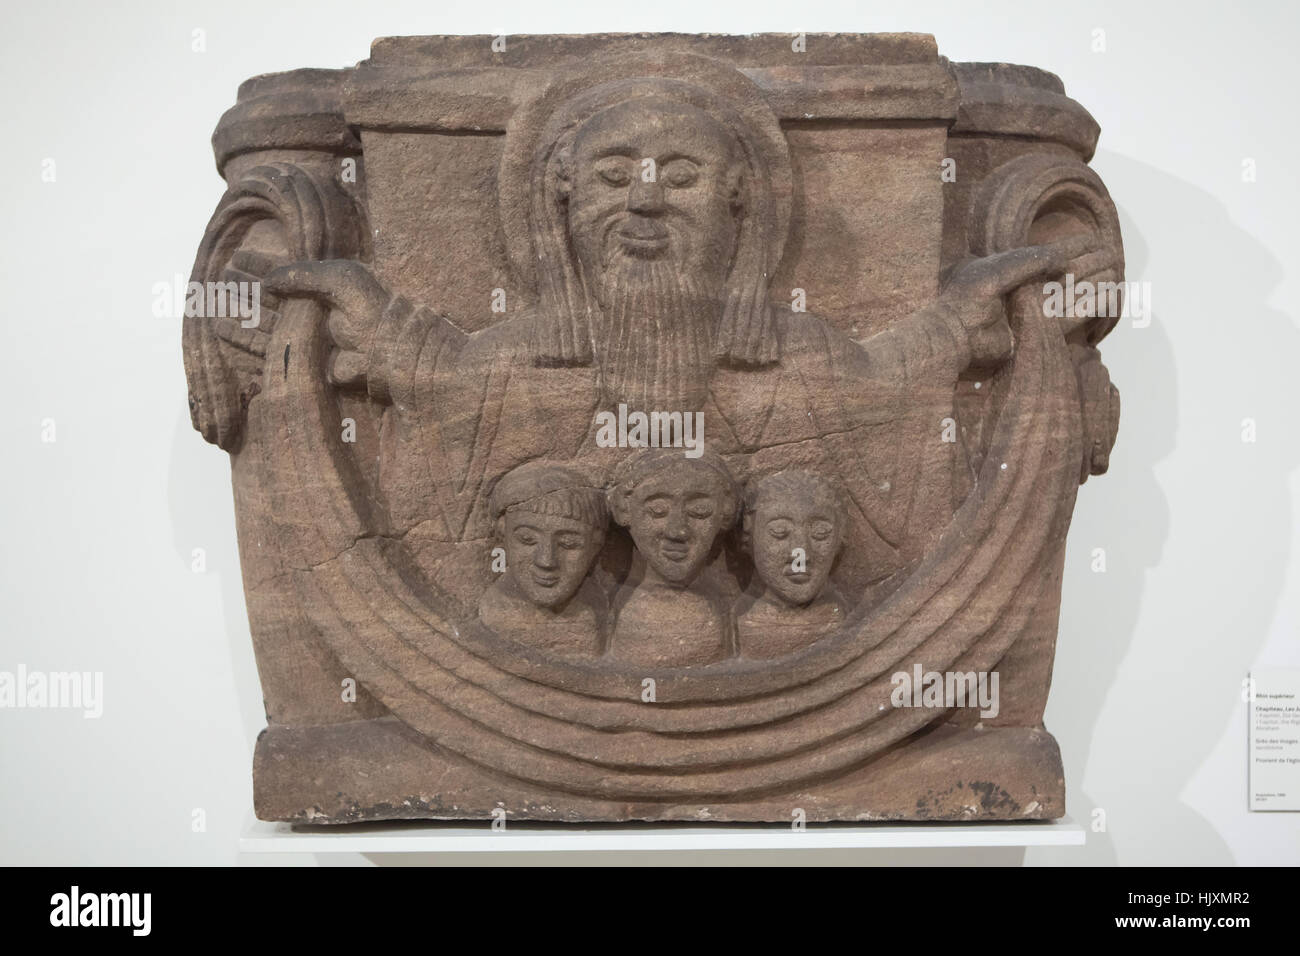 The Righteous in the Bosom of Abraham. Romanesque capital from 12th century from the Alspach Abbey on display in the Musee d'Unterlinden (Unterlinden Museum) in Colmar, Alsace, France. Stock Photo